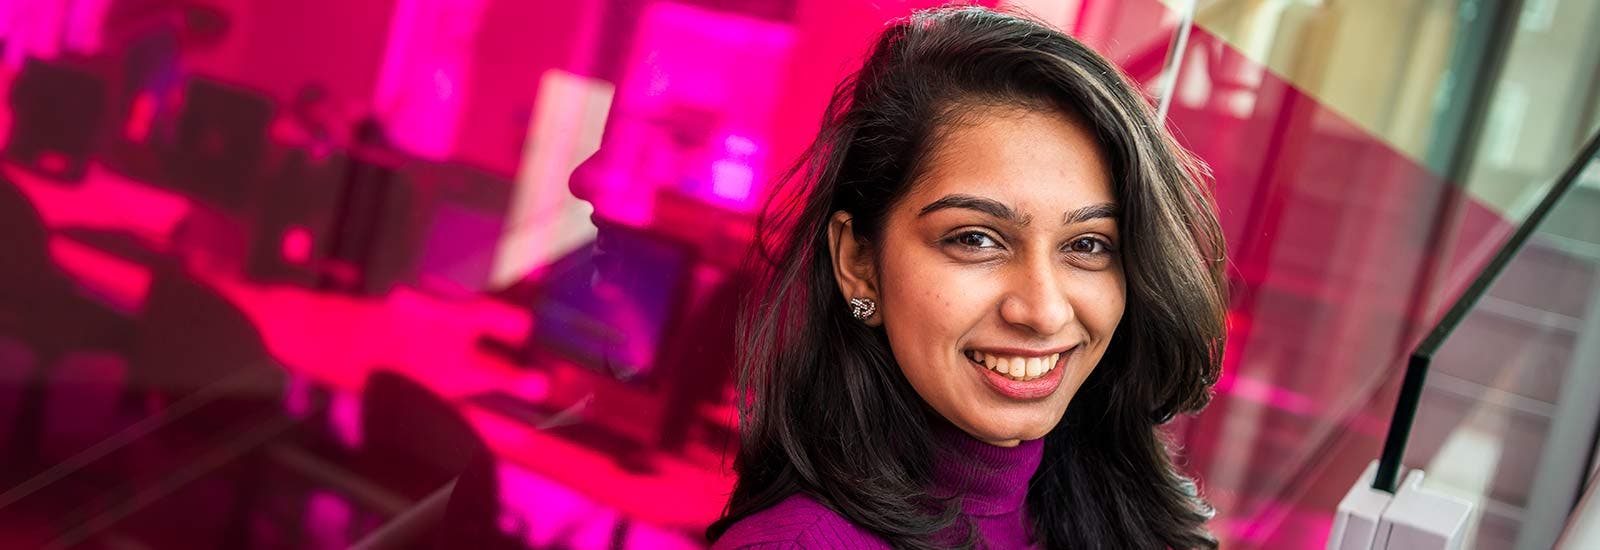 Student smiling in front of pink backdrop